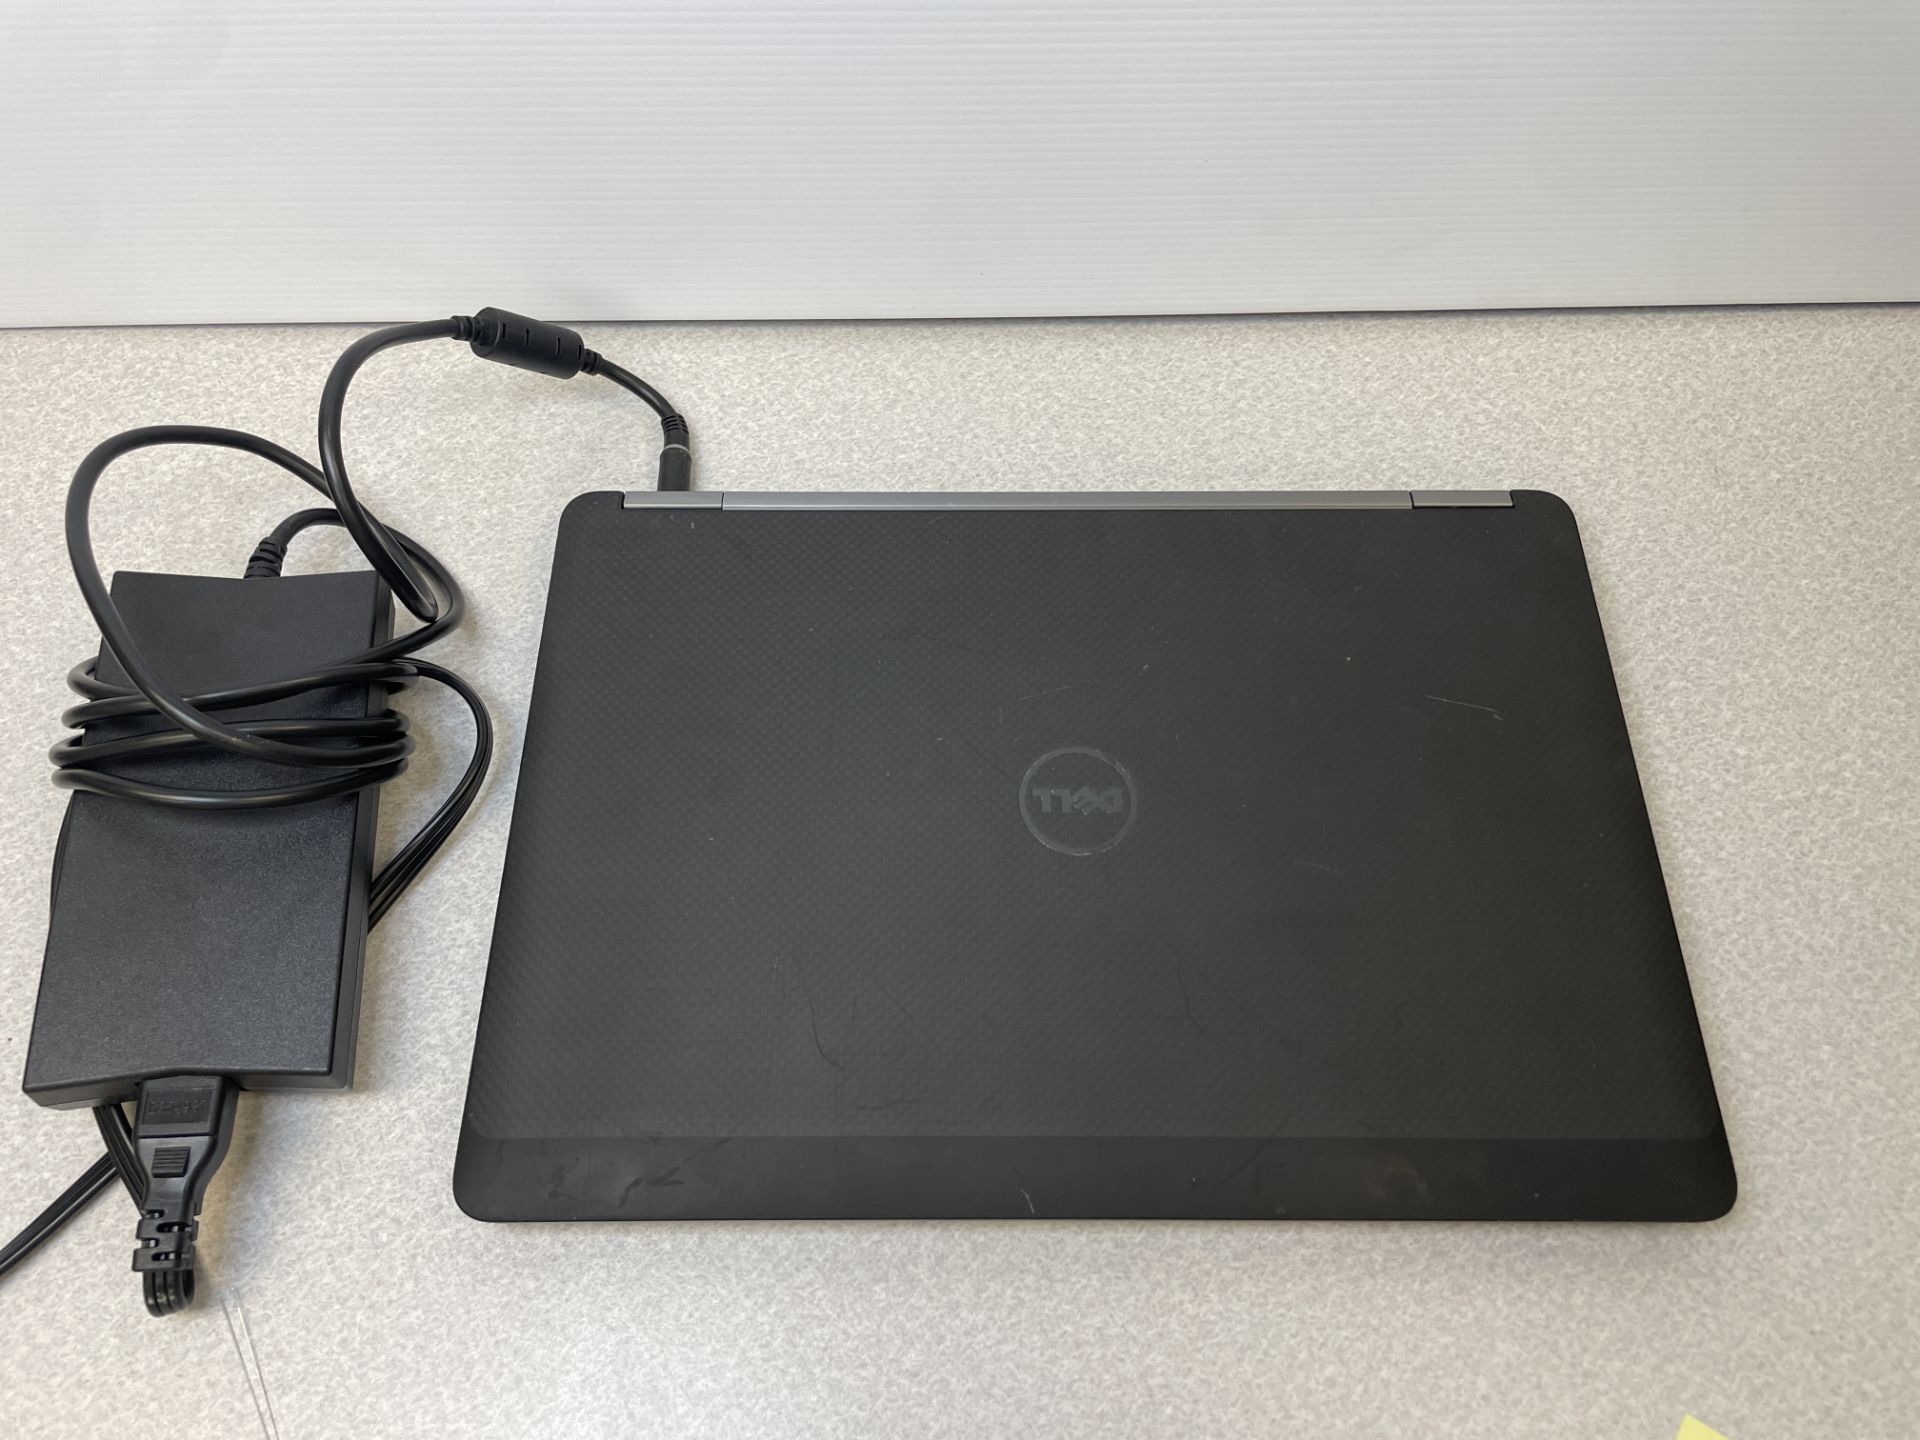 Dell Latitude E7470 Intel I7 6th Gen. Windows 10 S/N: 5MGWLC2 ( Will Not Turn On ) - Image 2 of 2